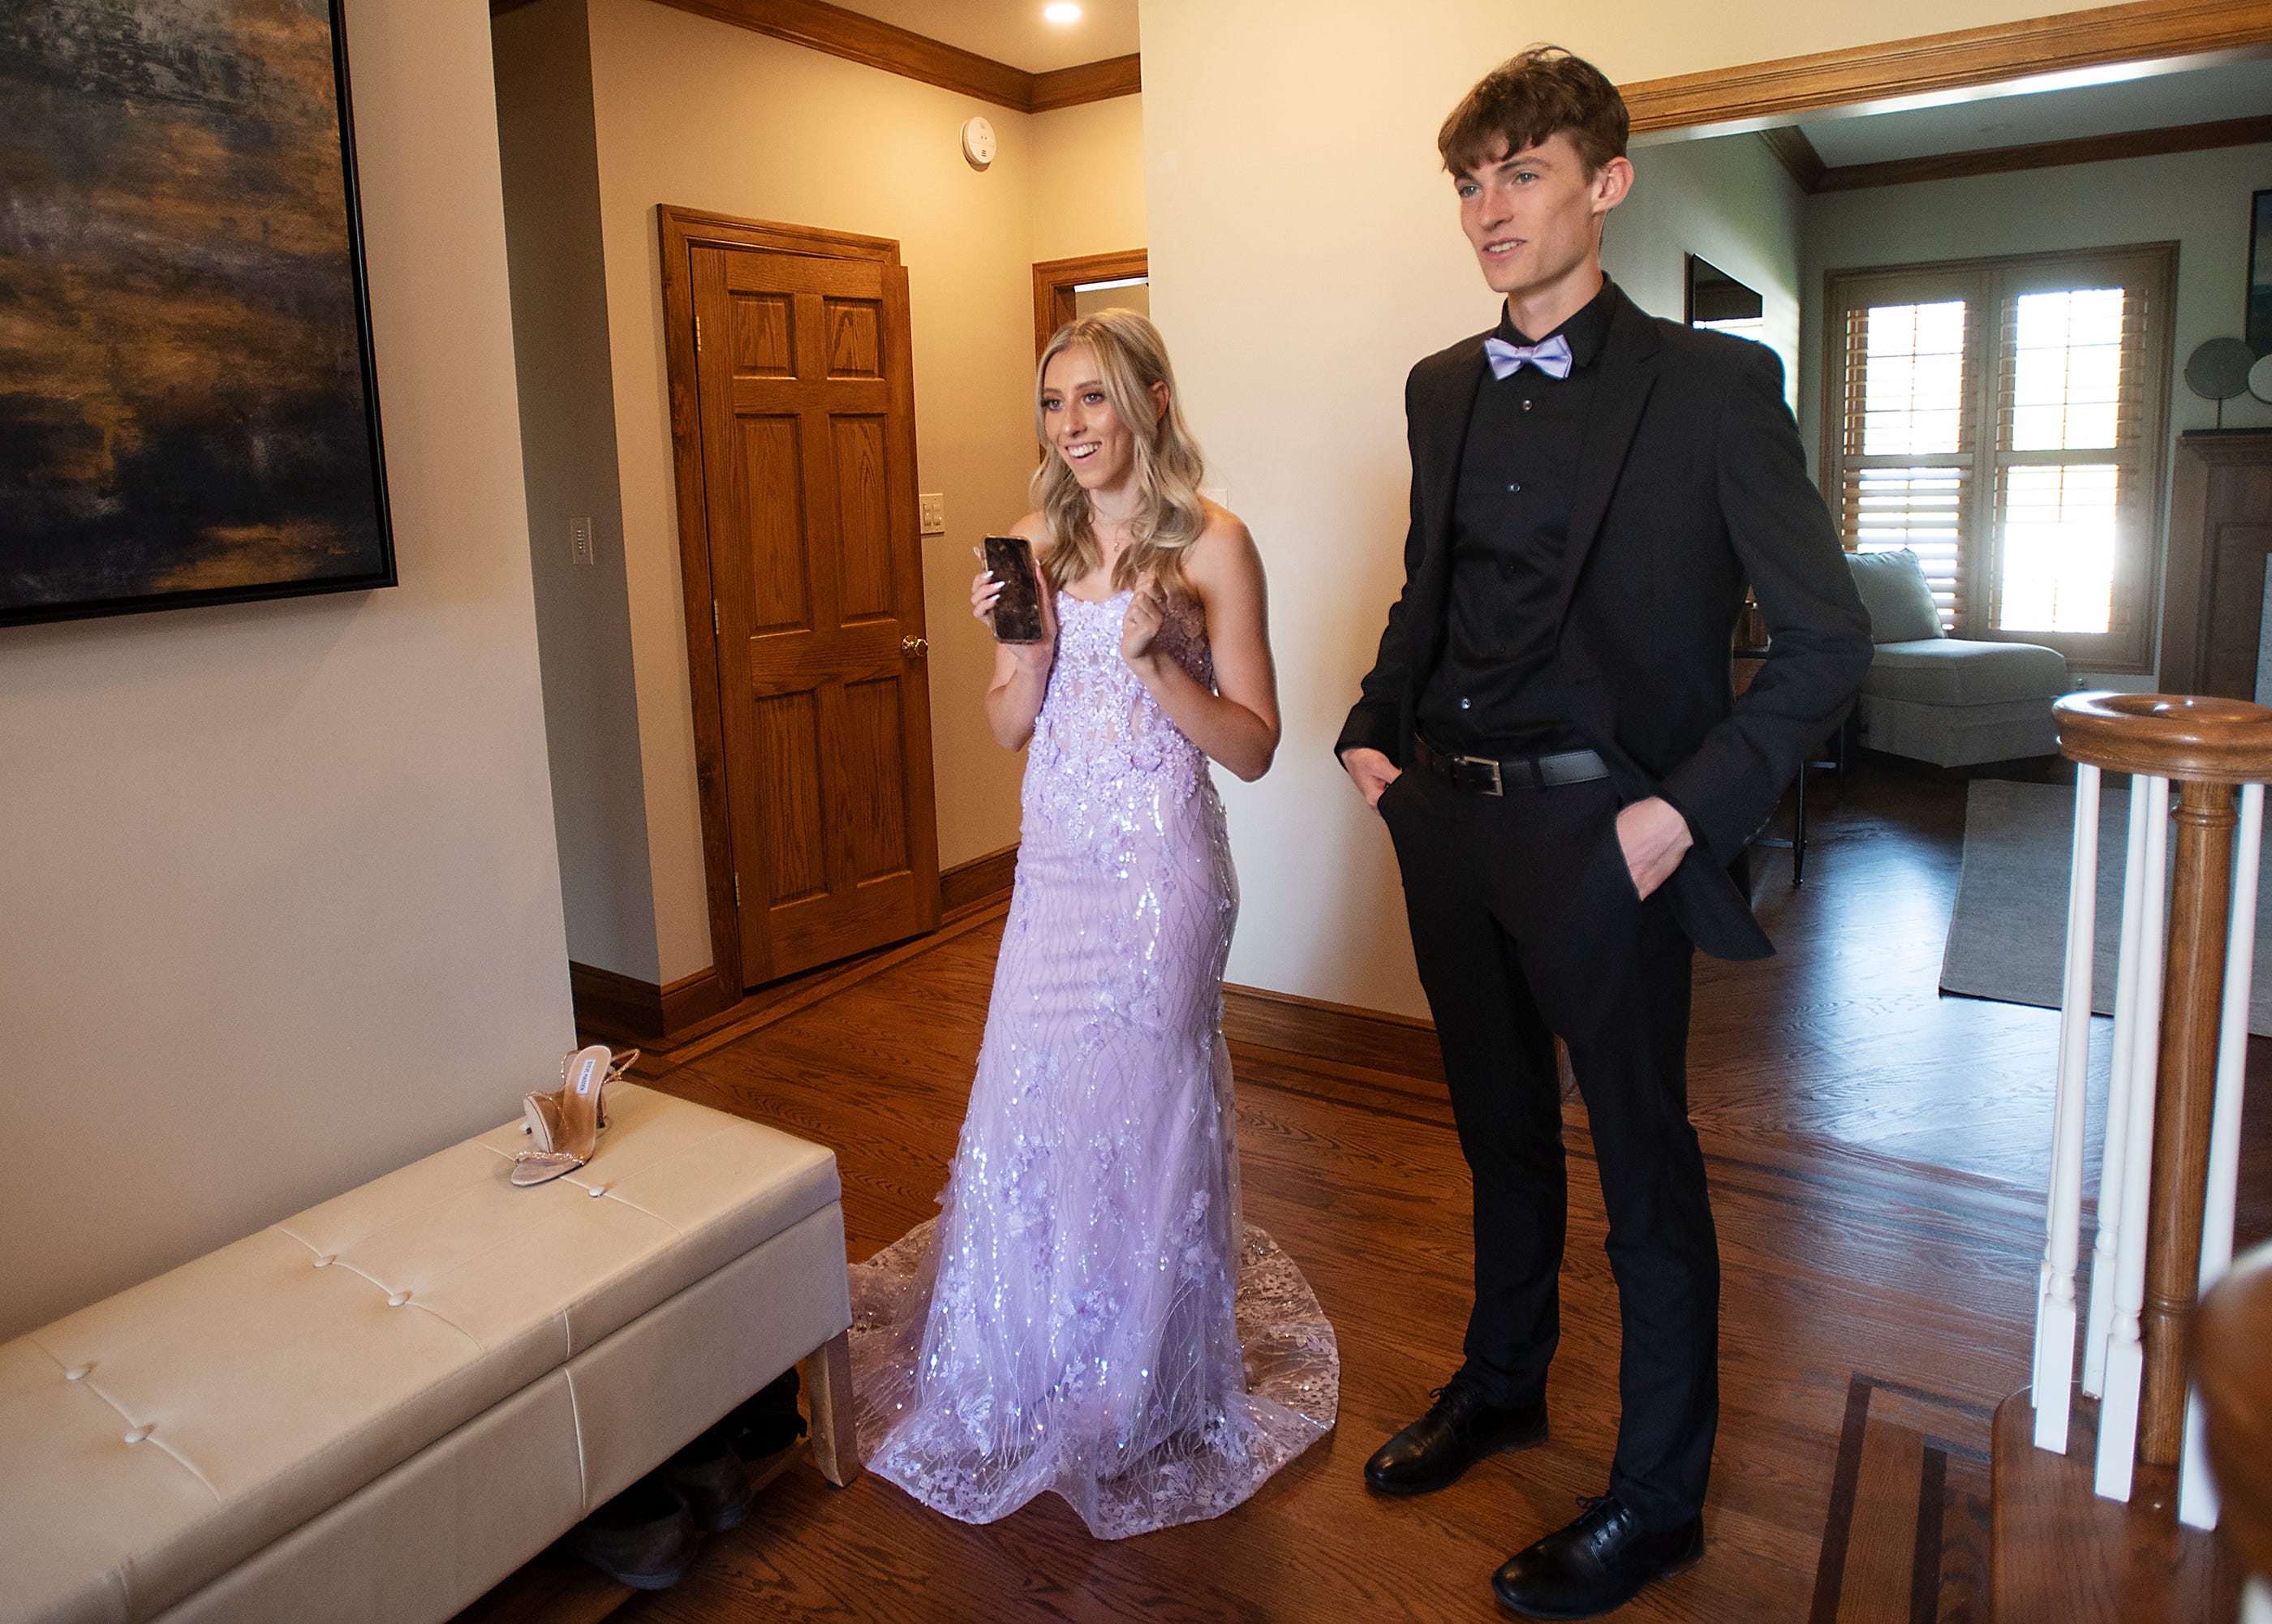 Mia Cochran waits for friends to arrive with her date, Krystof Purtell, at her family's Moon Township home before the Moon Area High School's prom on April 29, 2022.